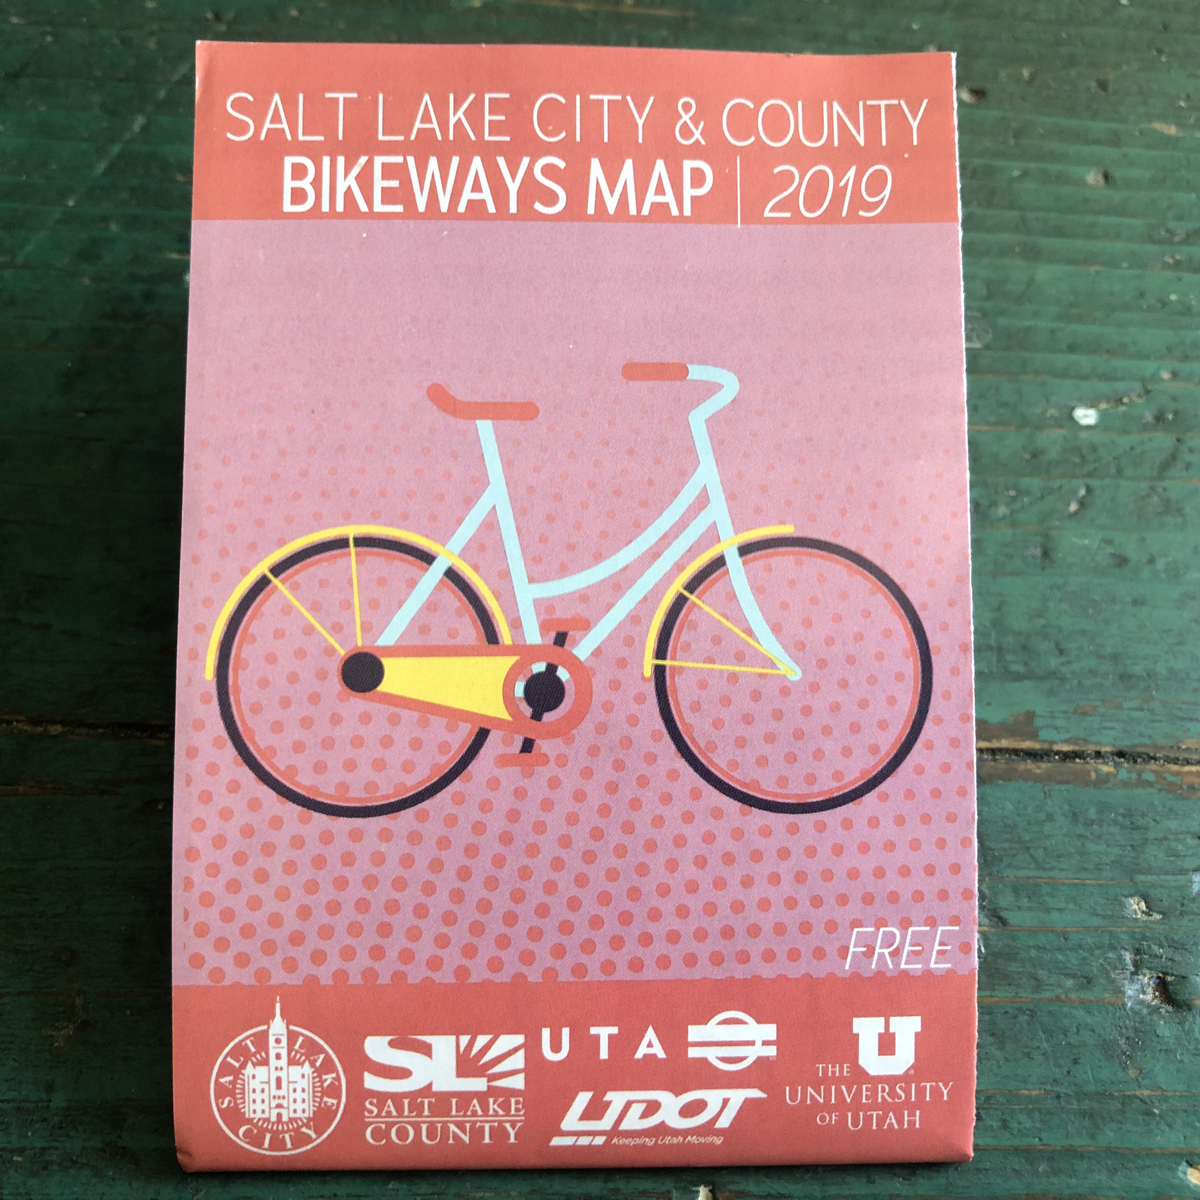 Salt Lake City's 2019 Bike Map is available for free in bike shops and other locations in Salt Lake County. Photo by Dave Iltis